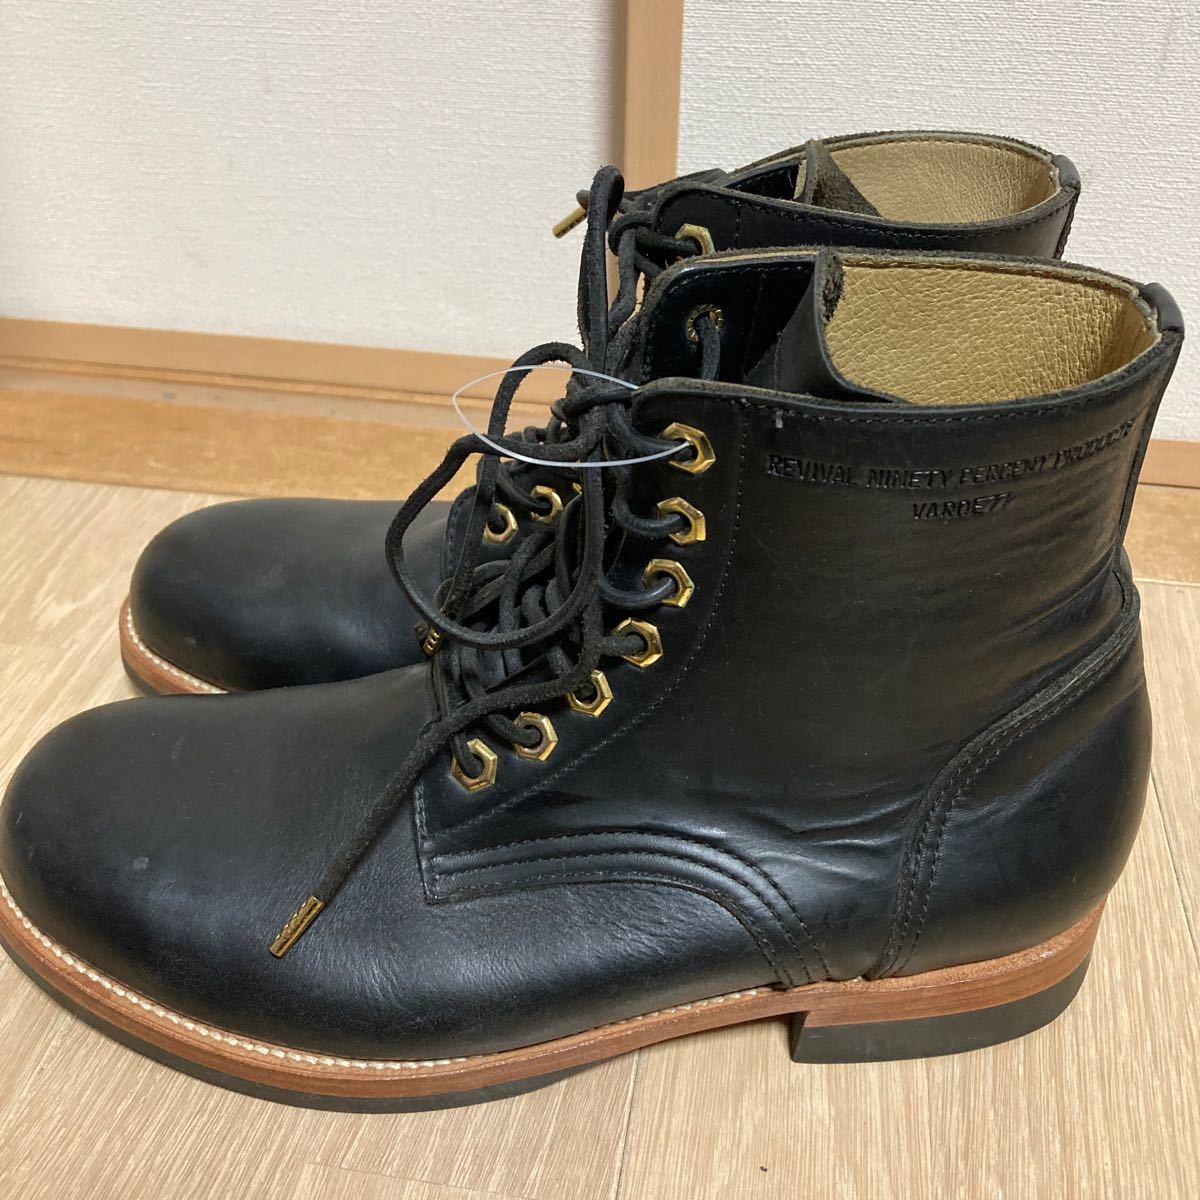 REVIVAL 90% PRODUCTS by Varde77 バルデセブンティーセブン U.S. OIL LEATHER WORK BOOTS BLACK サイズ8_画像2